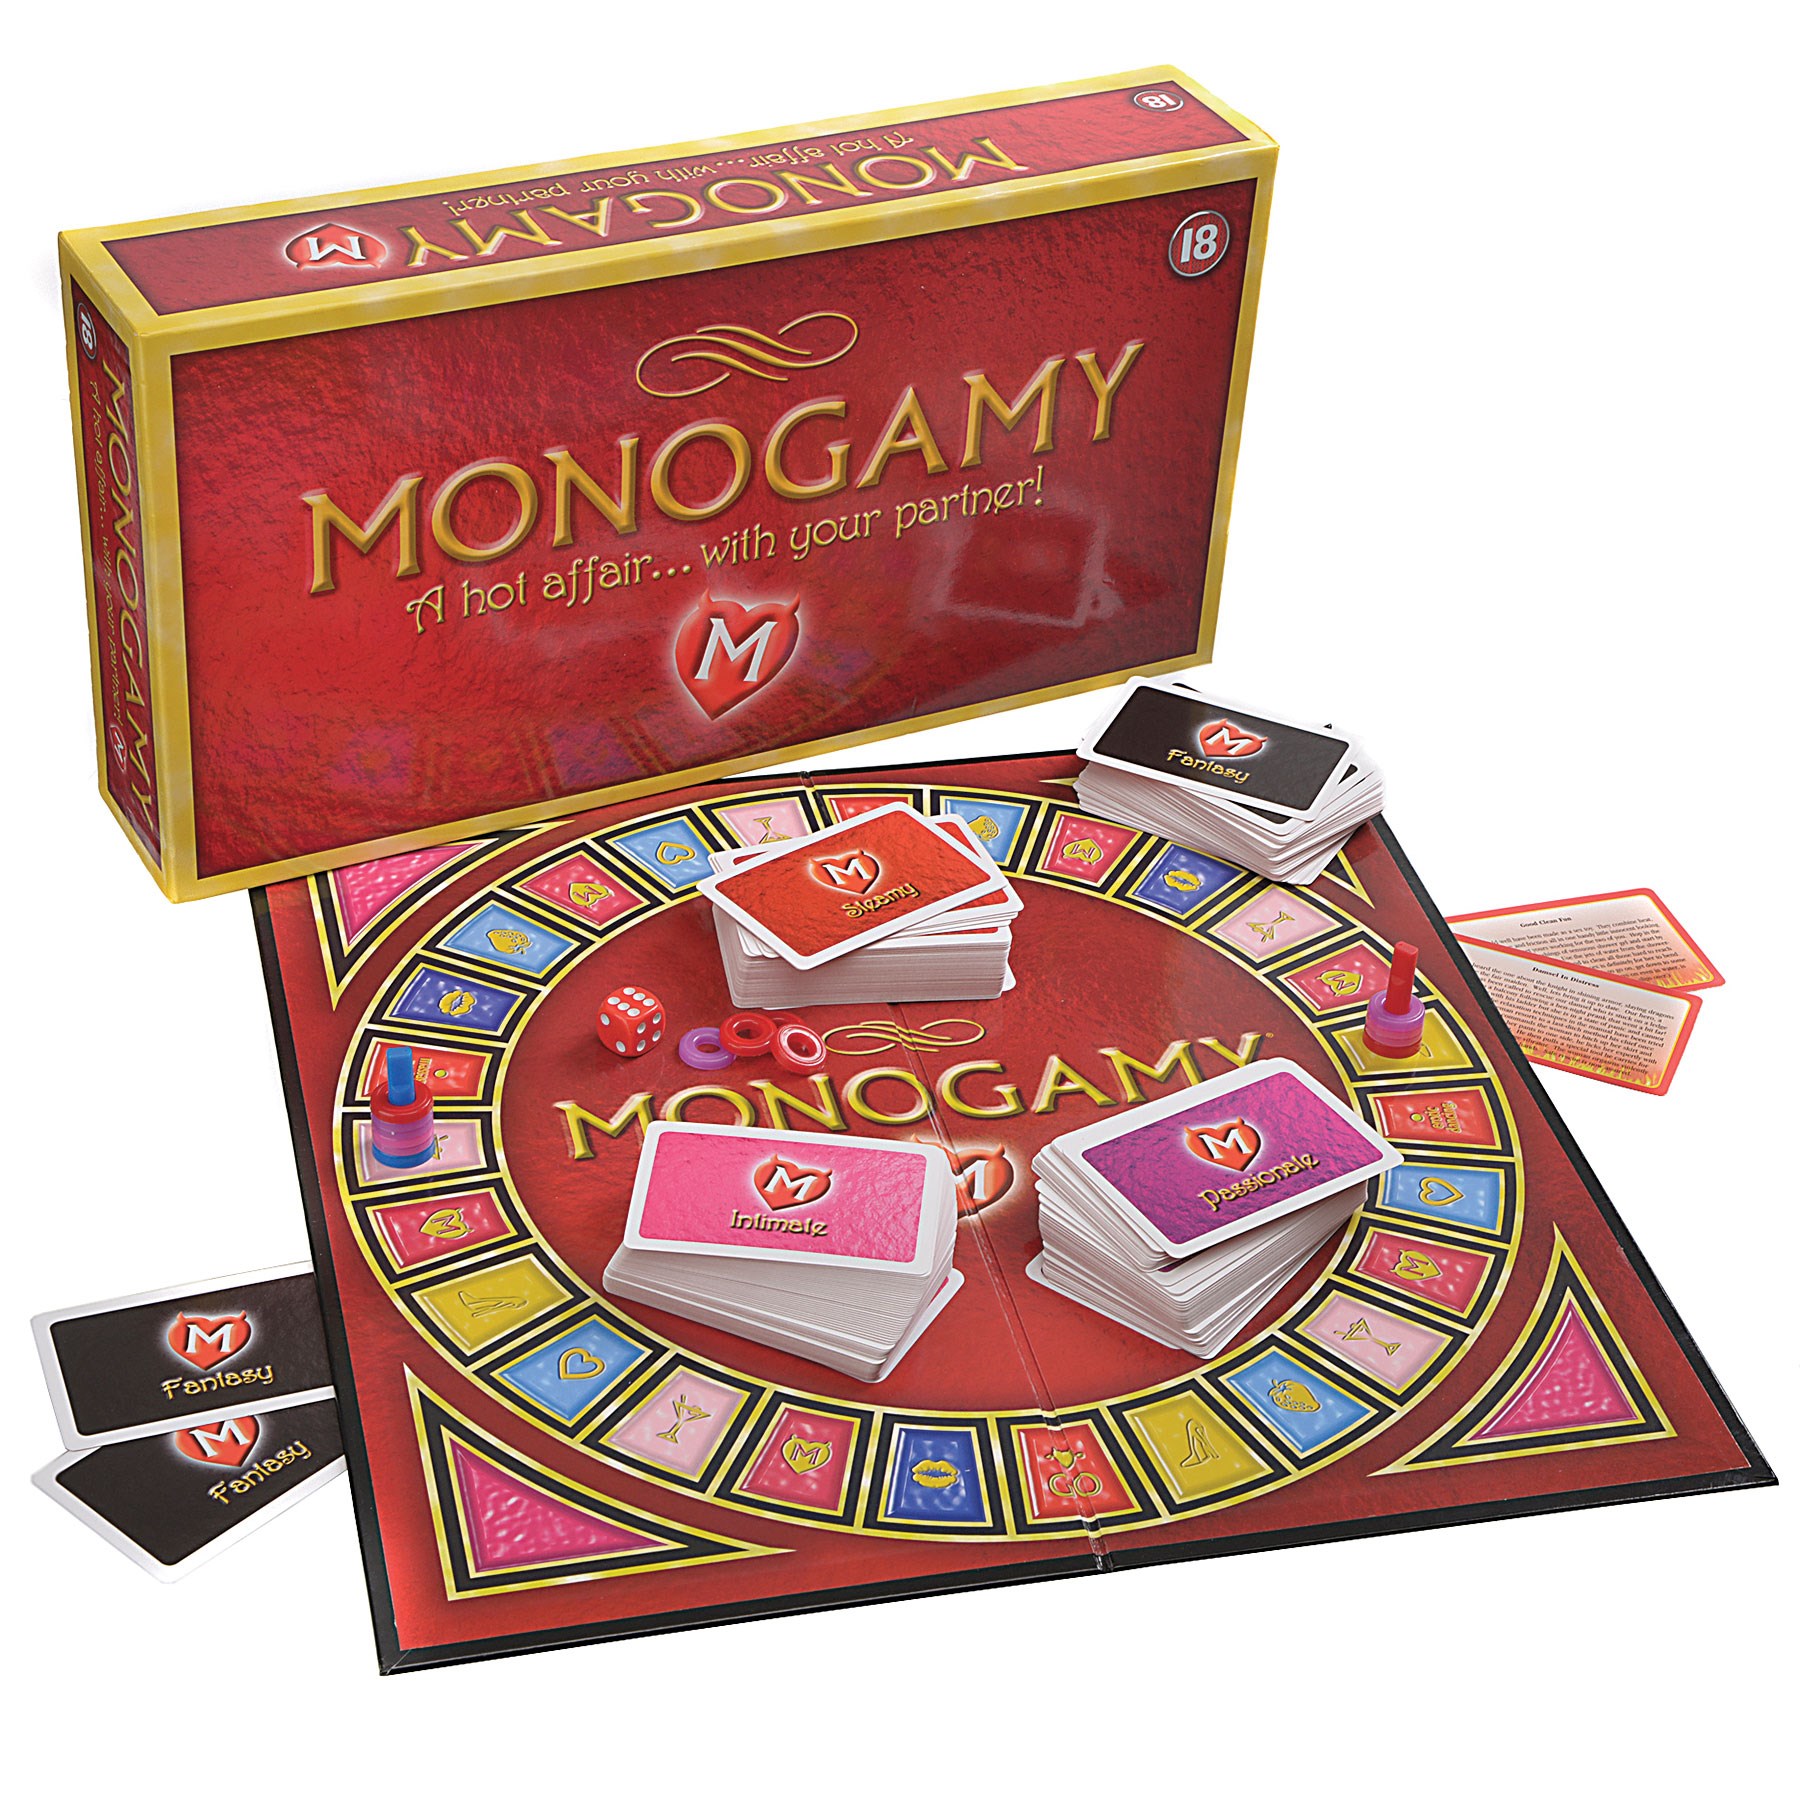 Monogamy A Hot Affair With Your Partner Game Box and game components